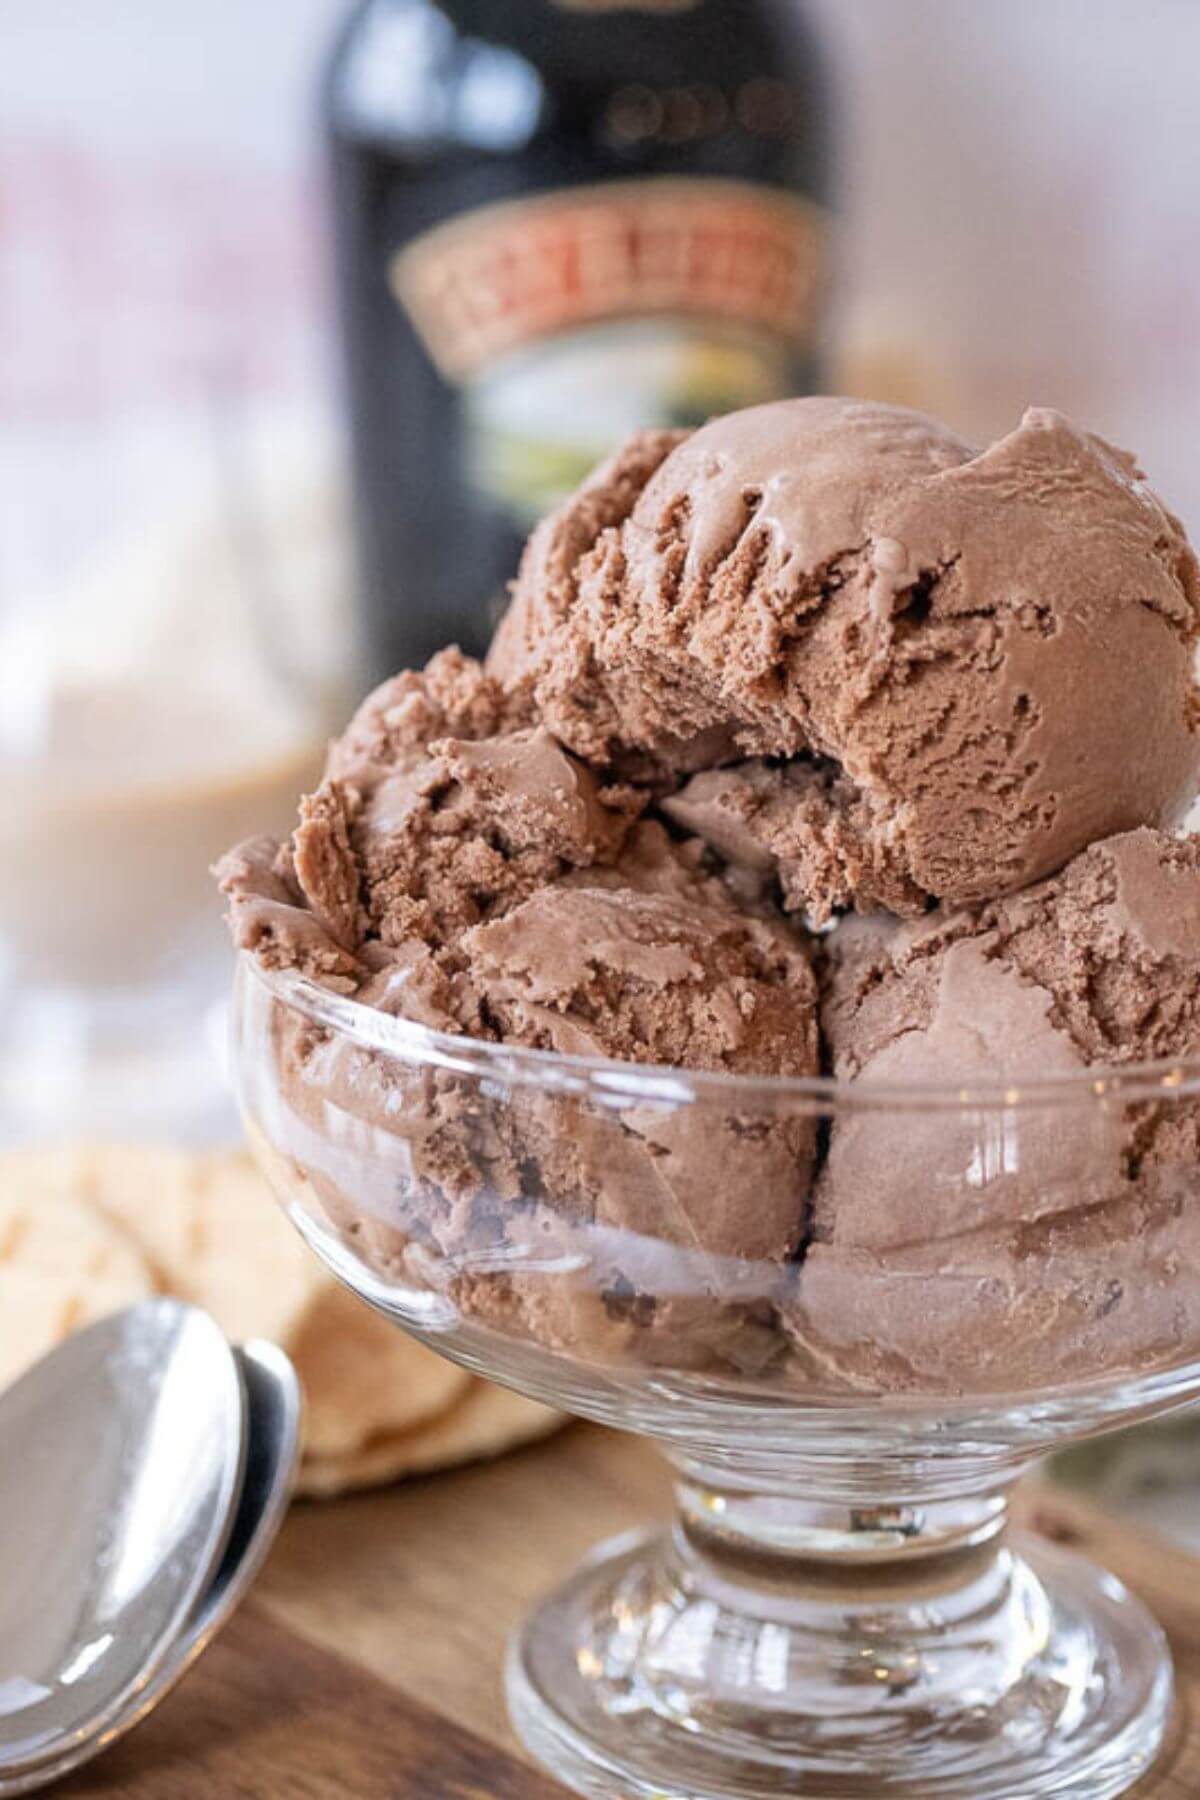 A close up shows the creamy texture of ice cream scoops filling a glass bowl with bottle of Baileys behind it.